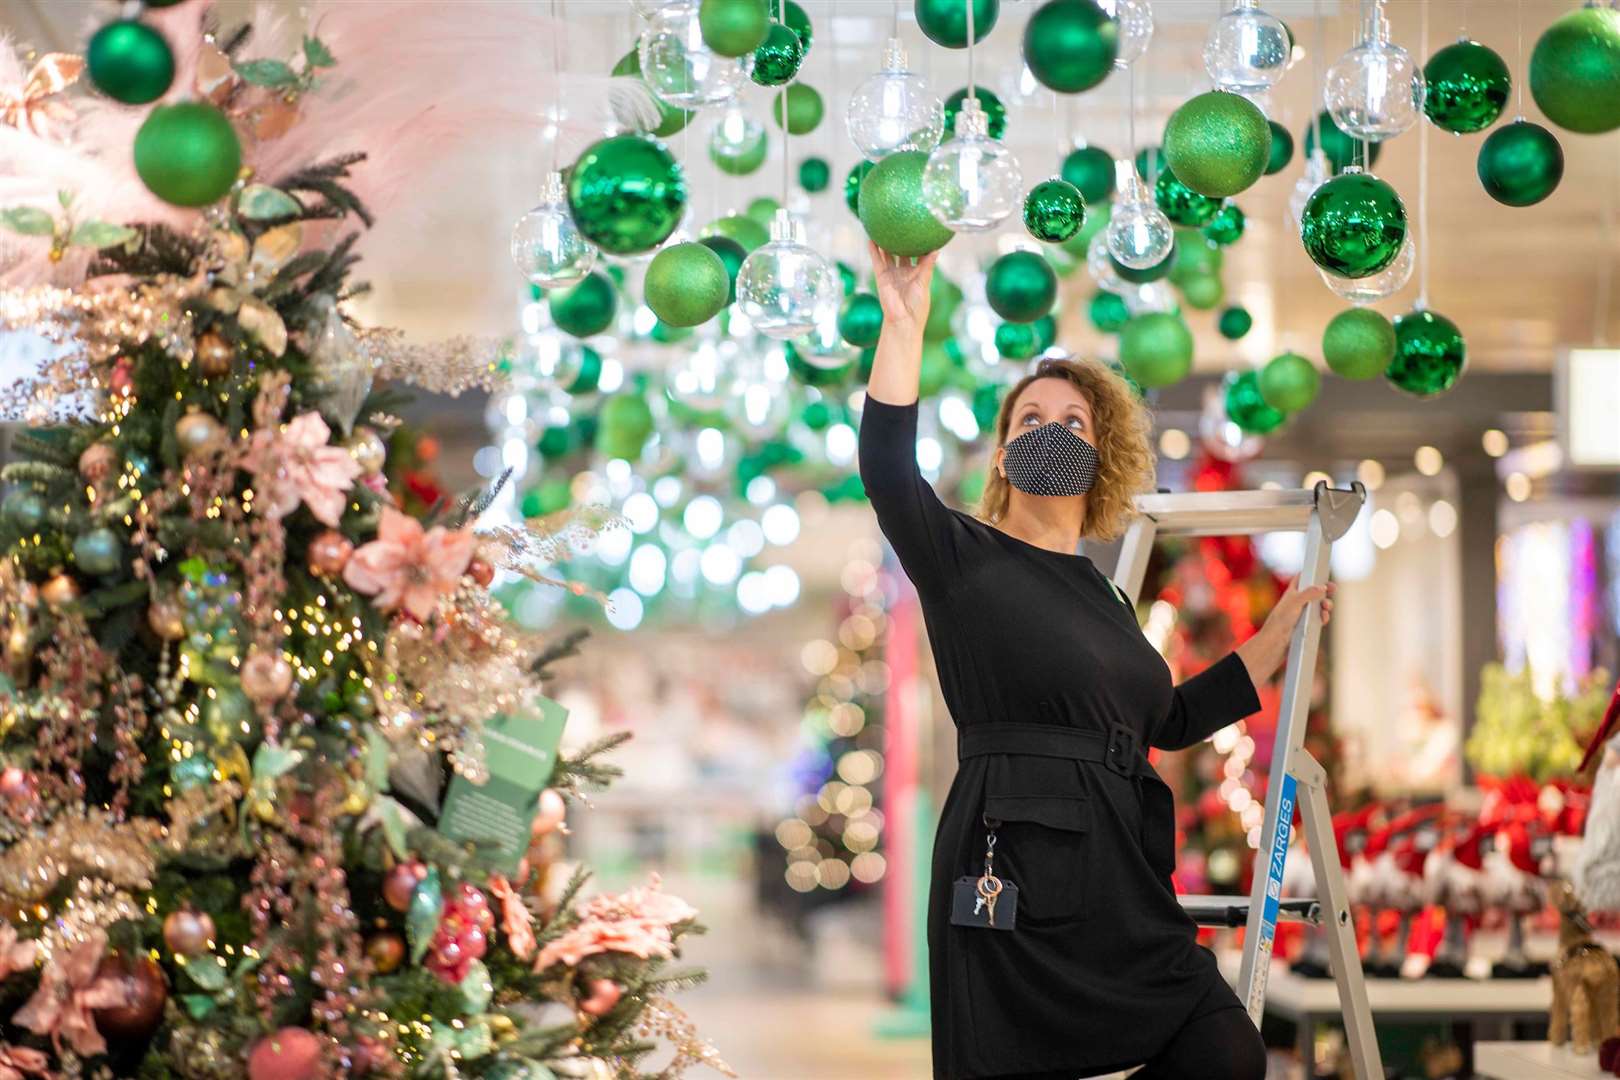 John Lewis is looking for more than 7,000 new staff for festive roles